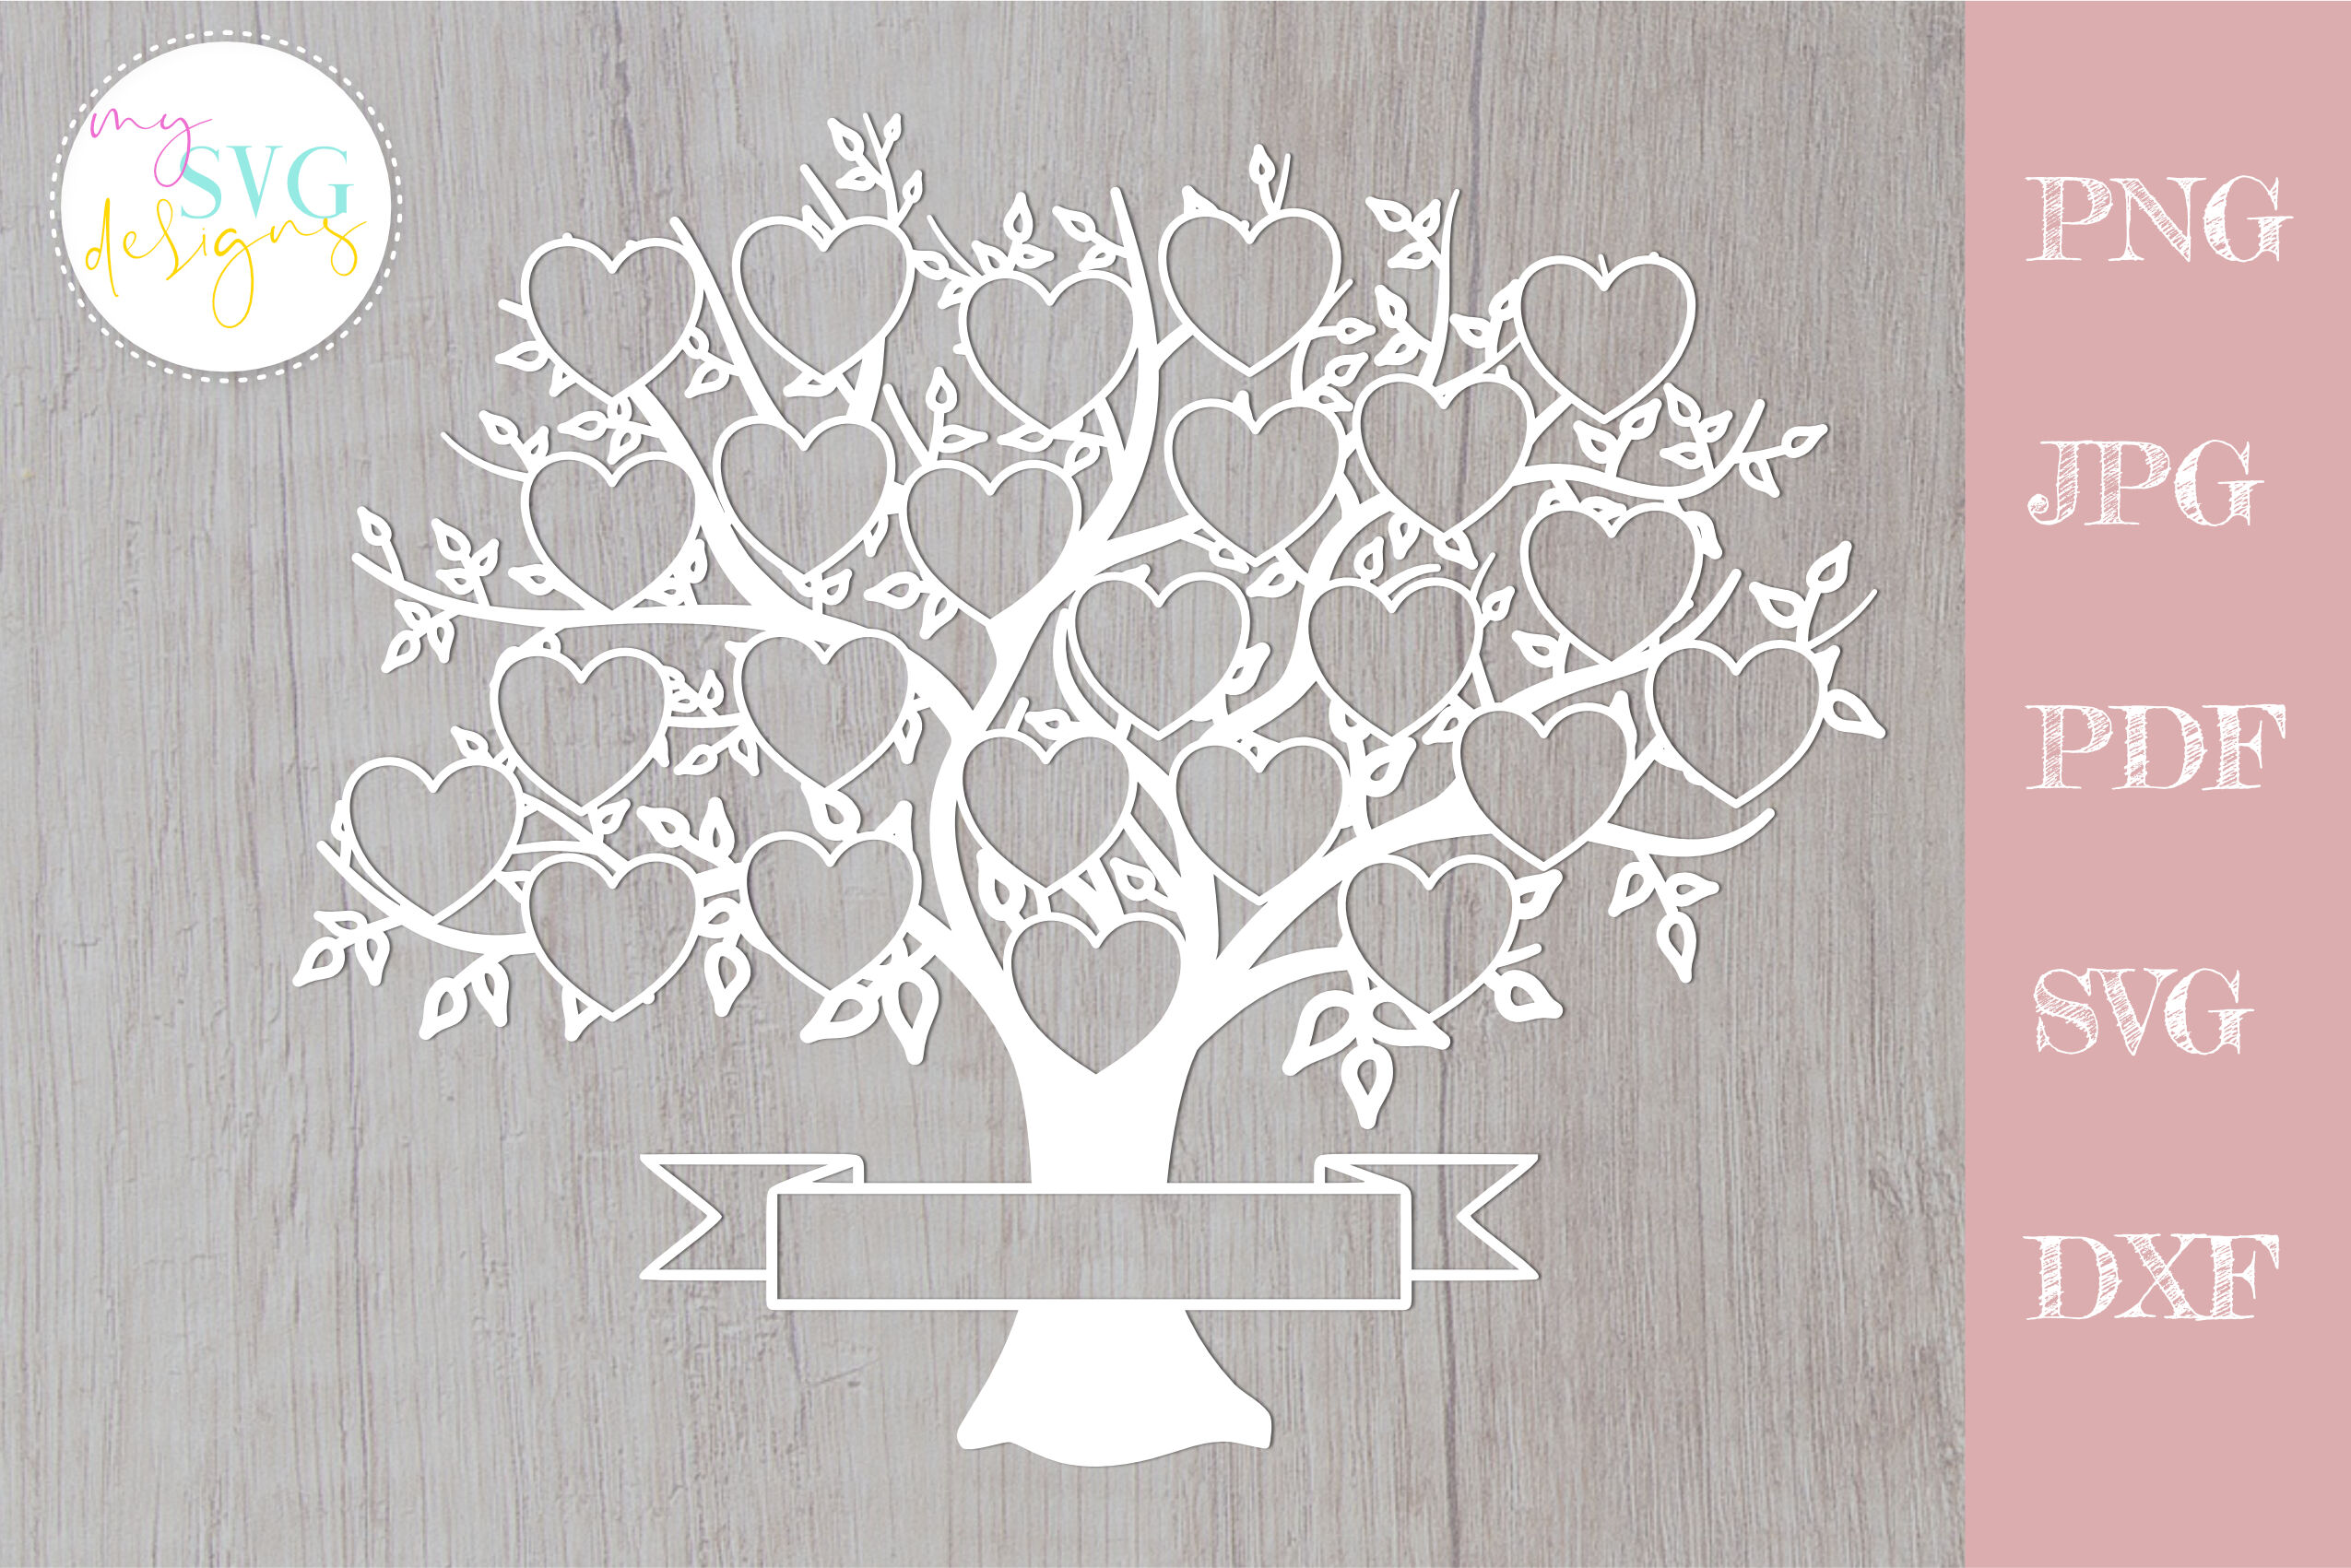 Family tree svg 24 members, svg family tree, family reunion svg By